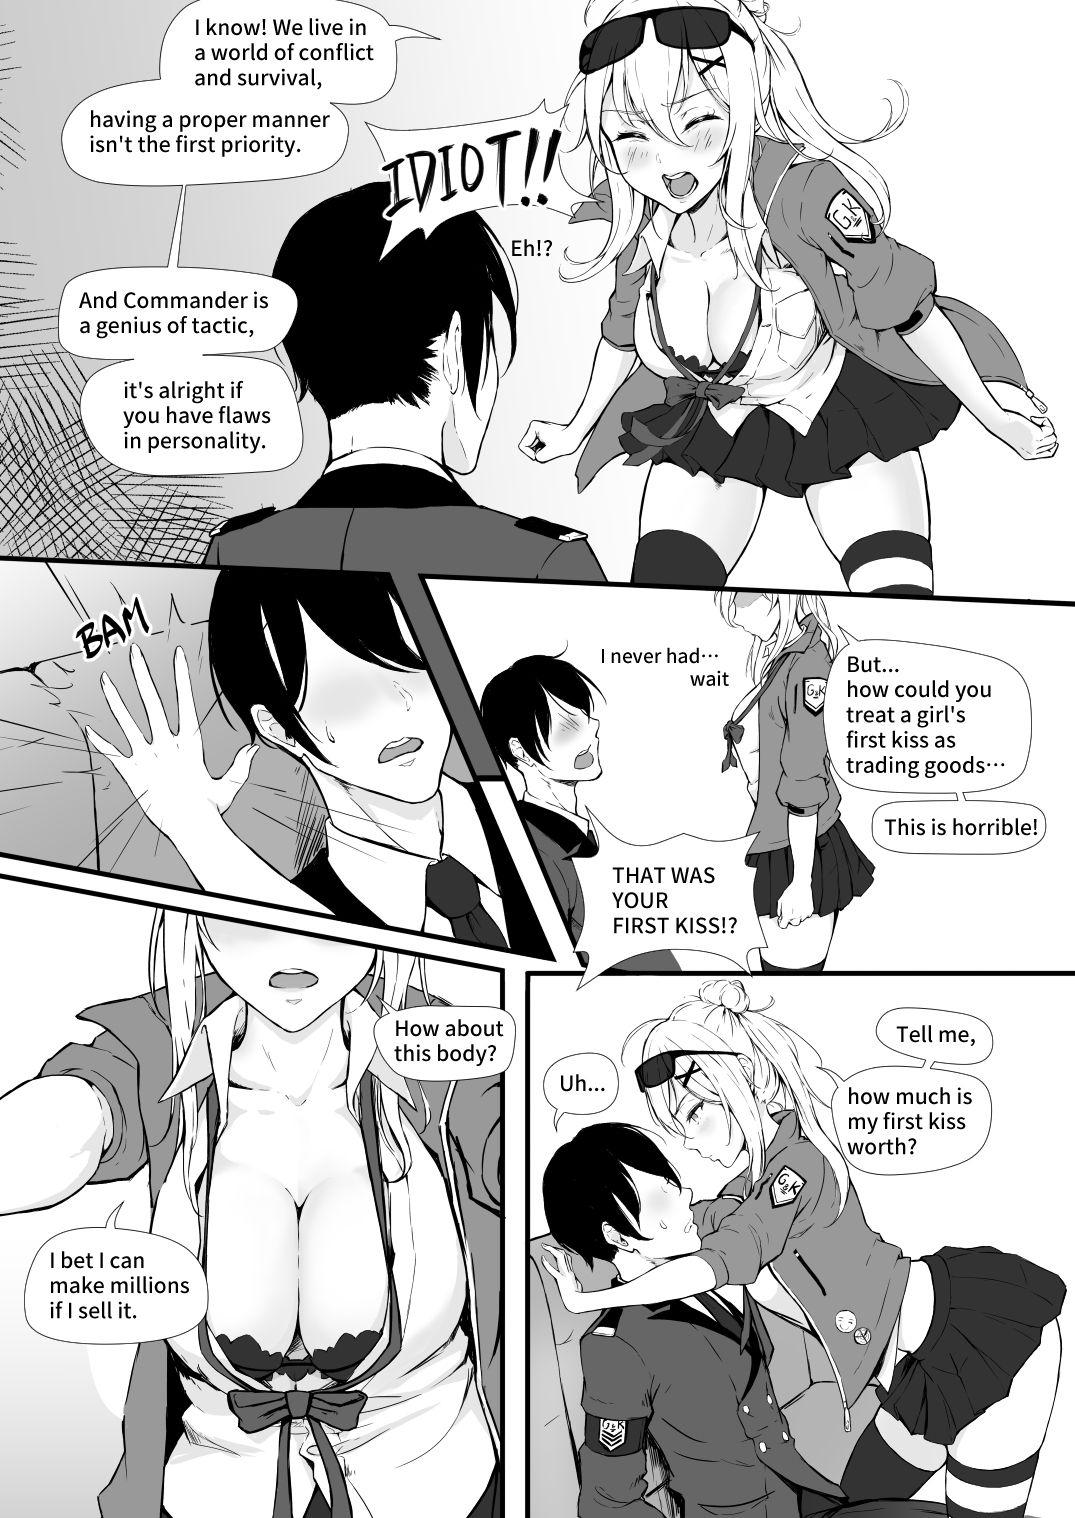 Free Hardcore How Many Diamonds a Kiss Worth? - Girls frontline Skirt - Page 9